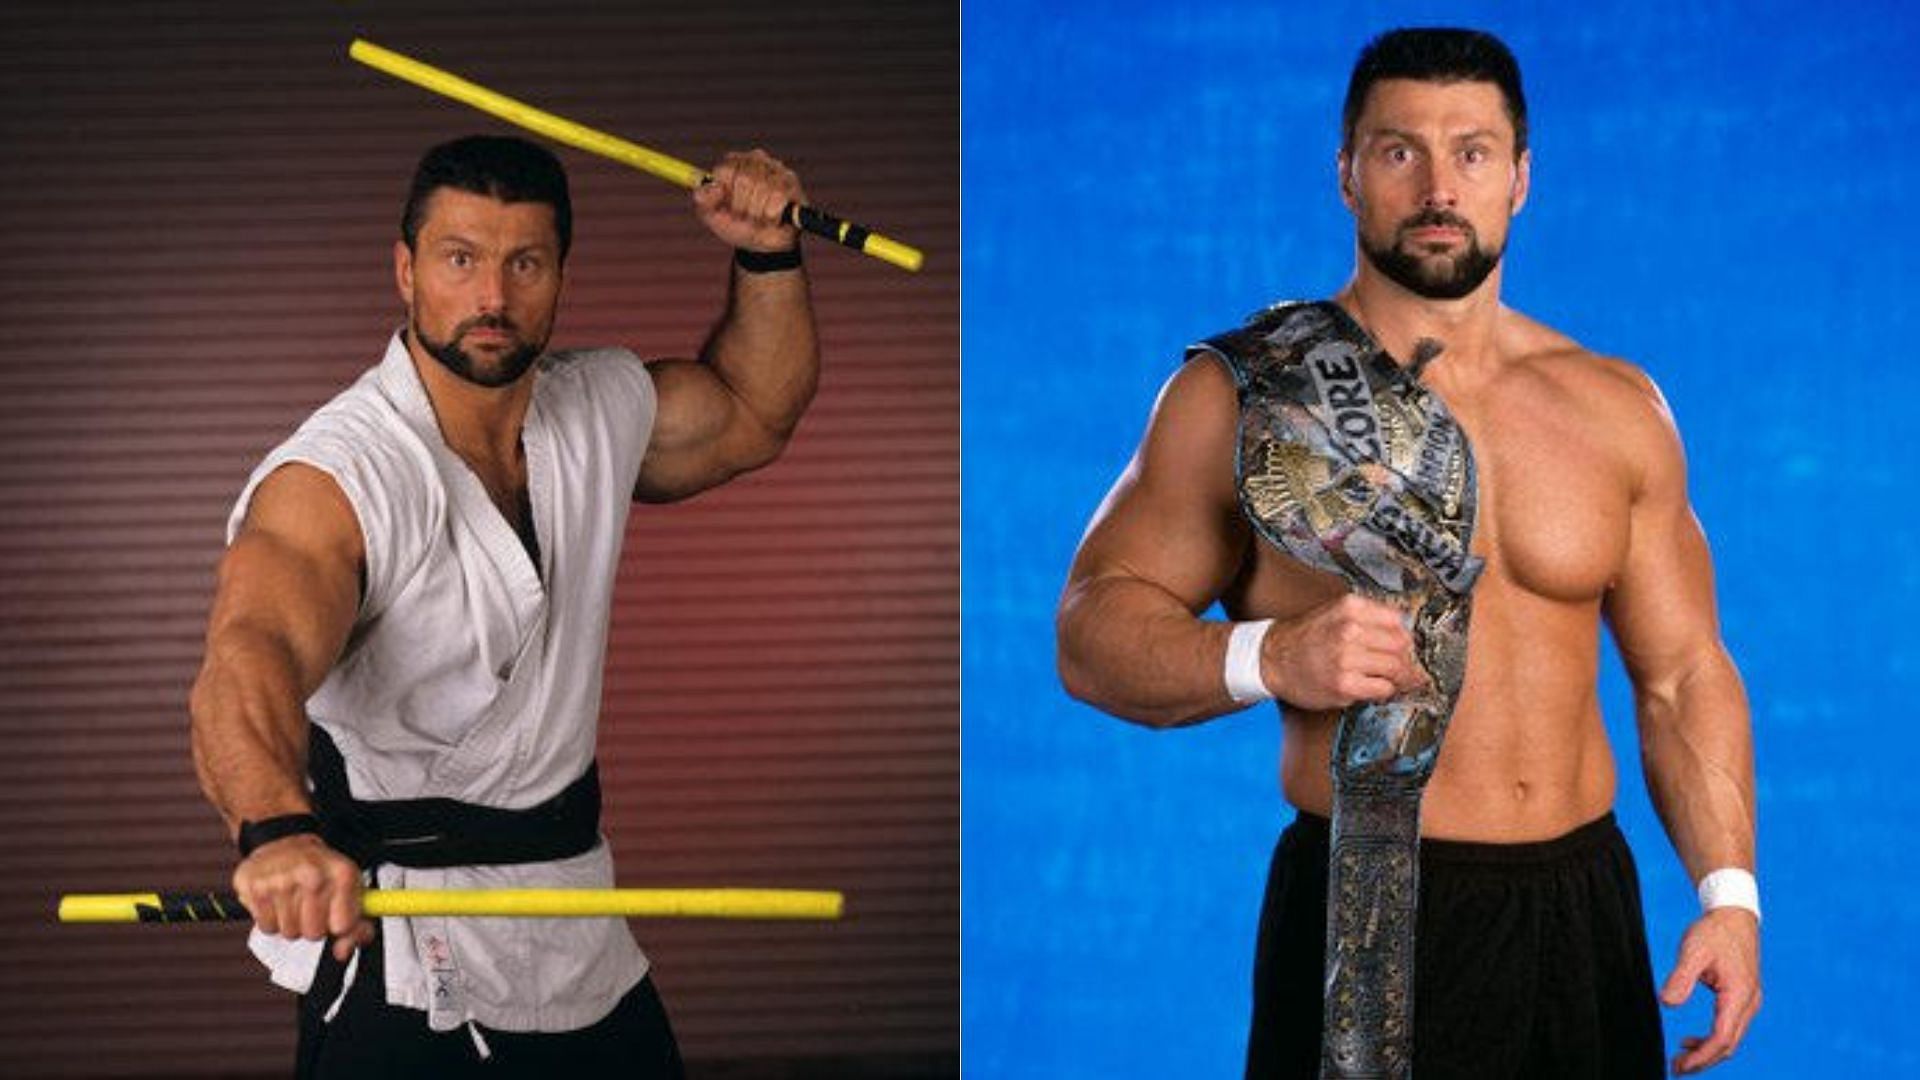 Steve Blackman worked for WWE between 1997 and 2002